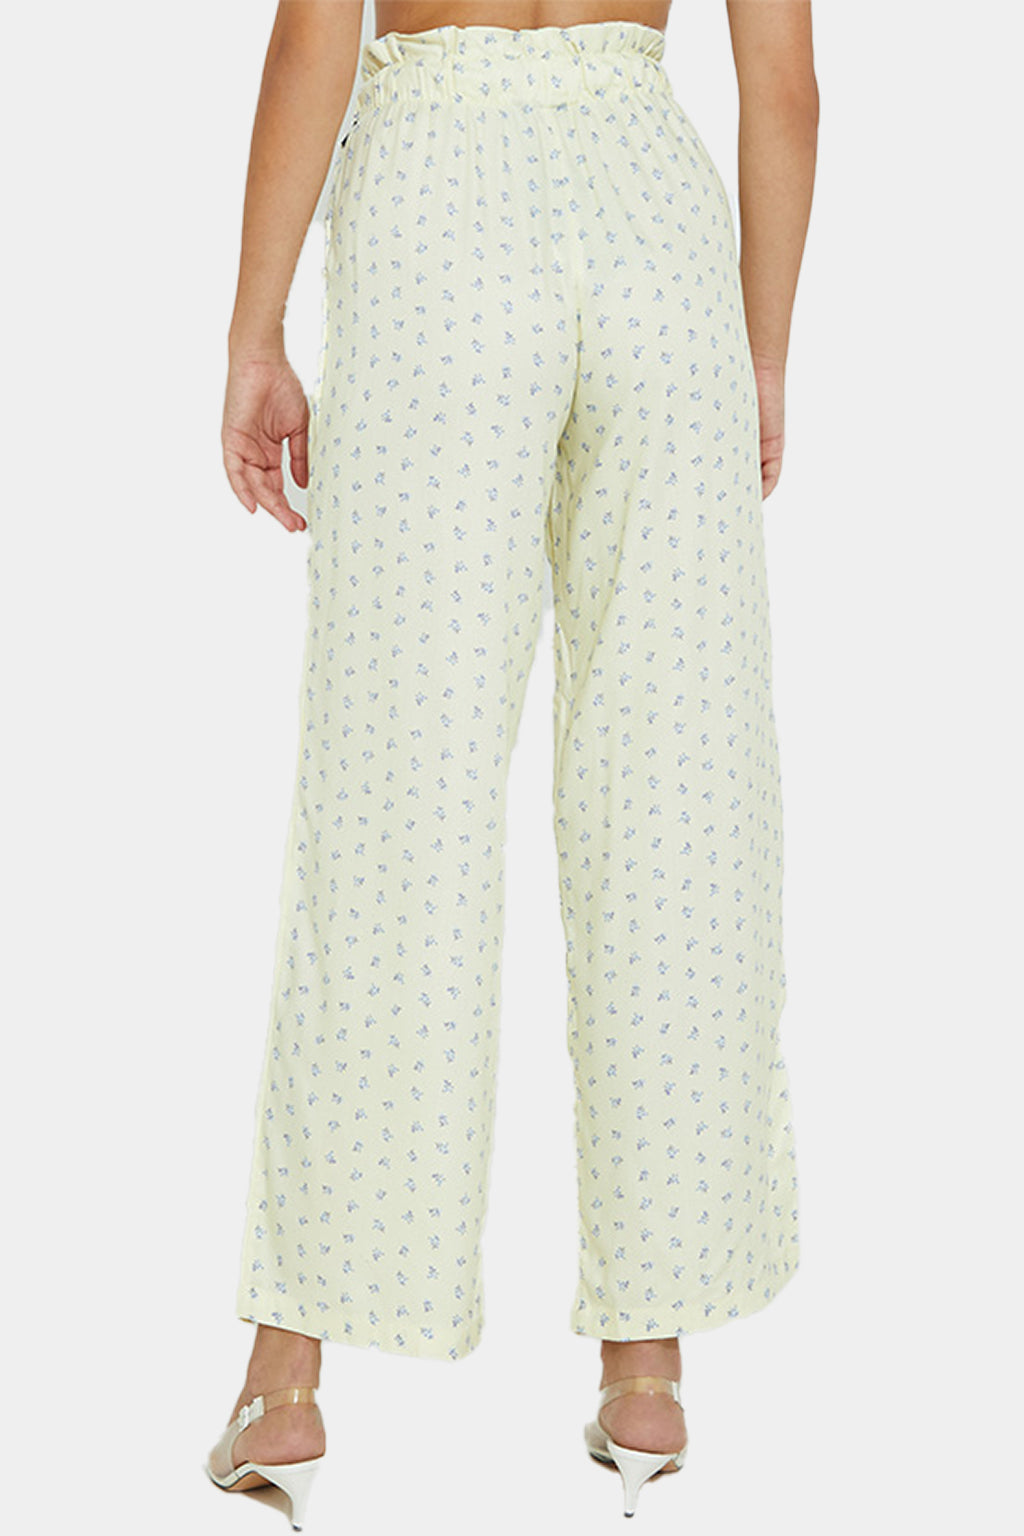 Beverly Hills Polo Club -  Printed Paper Bag Pants